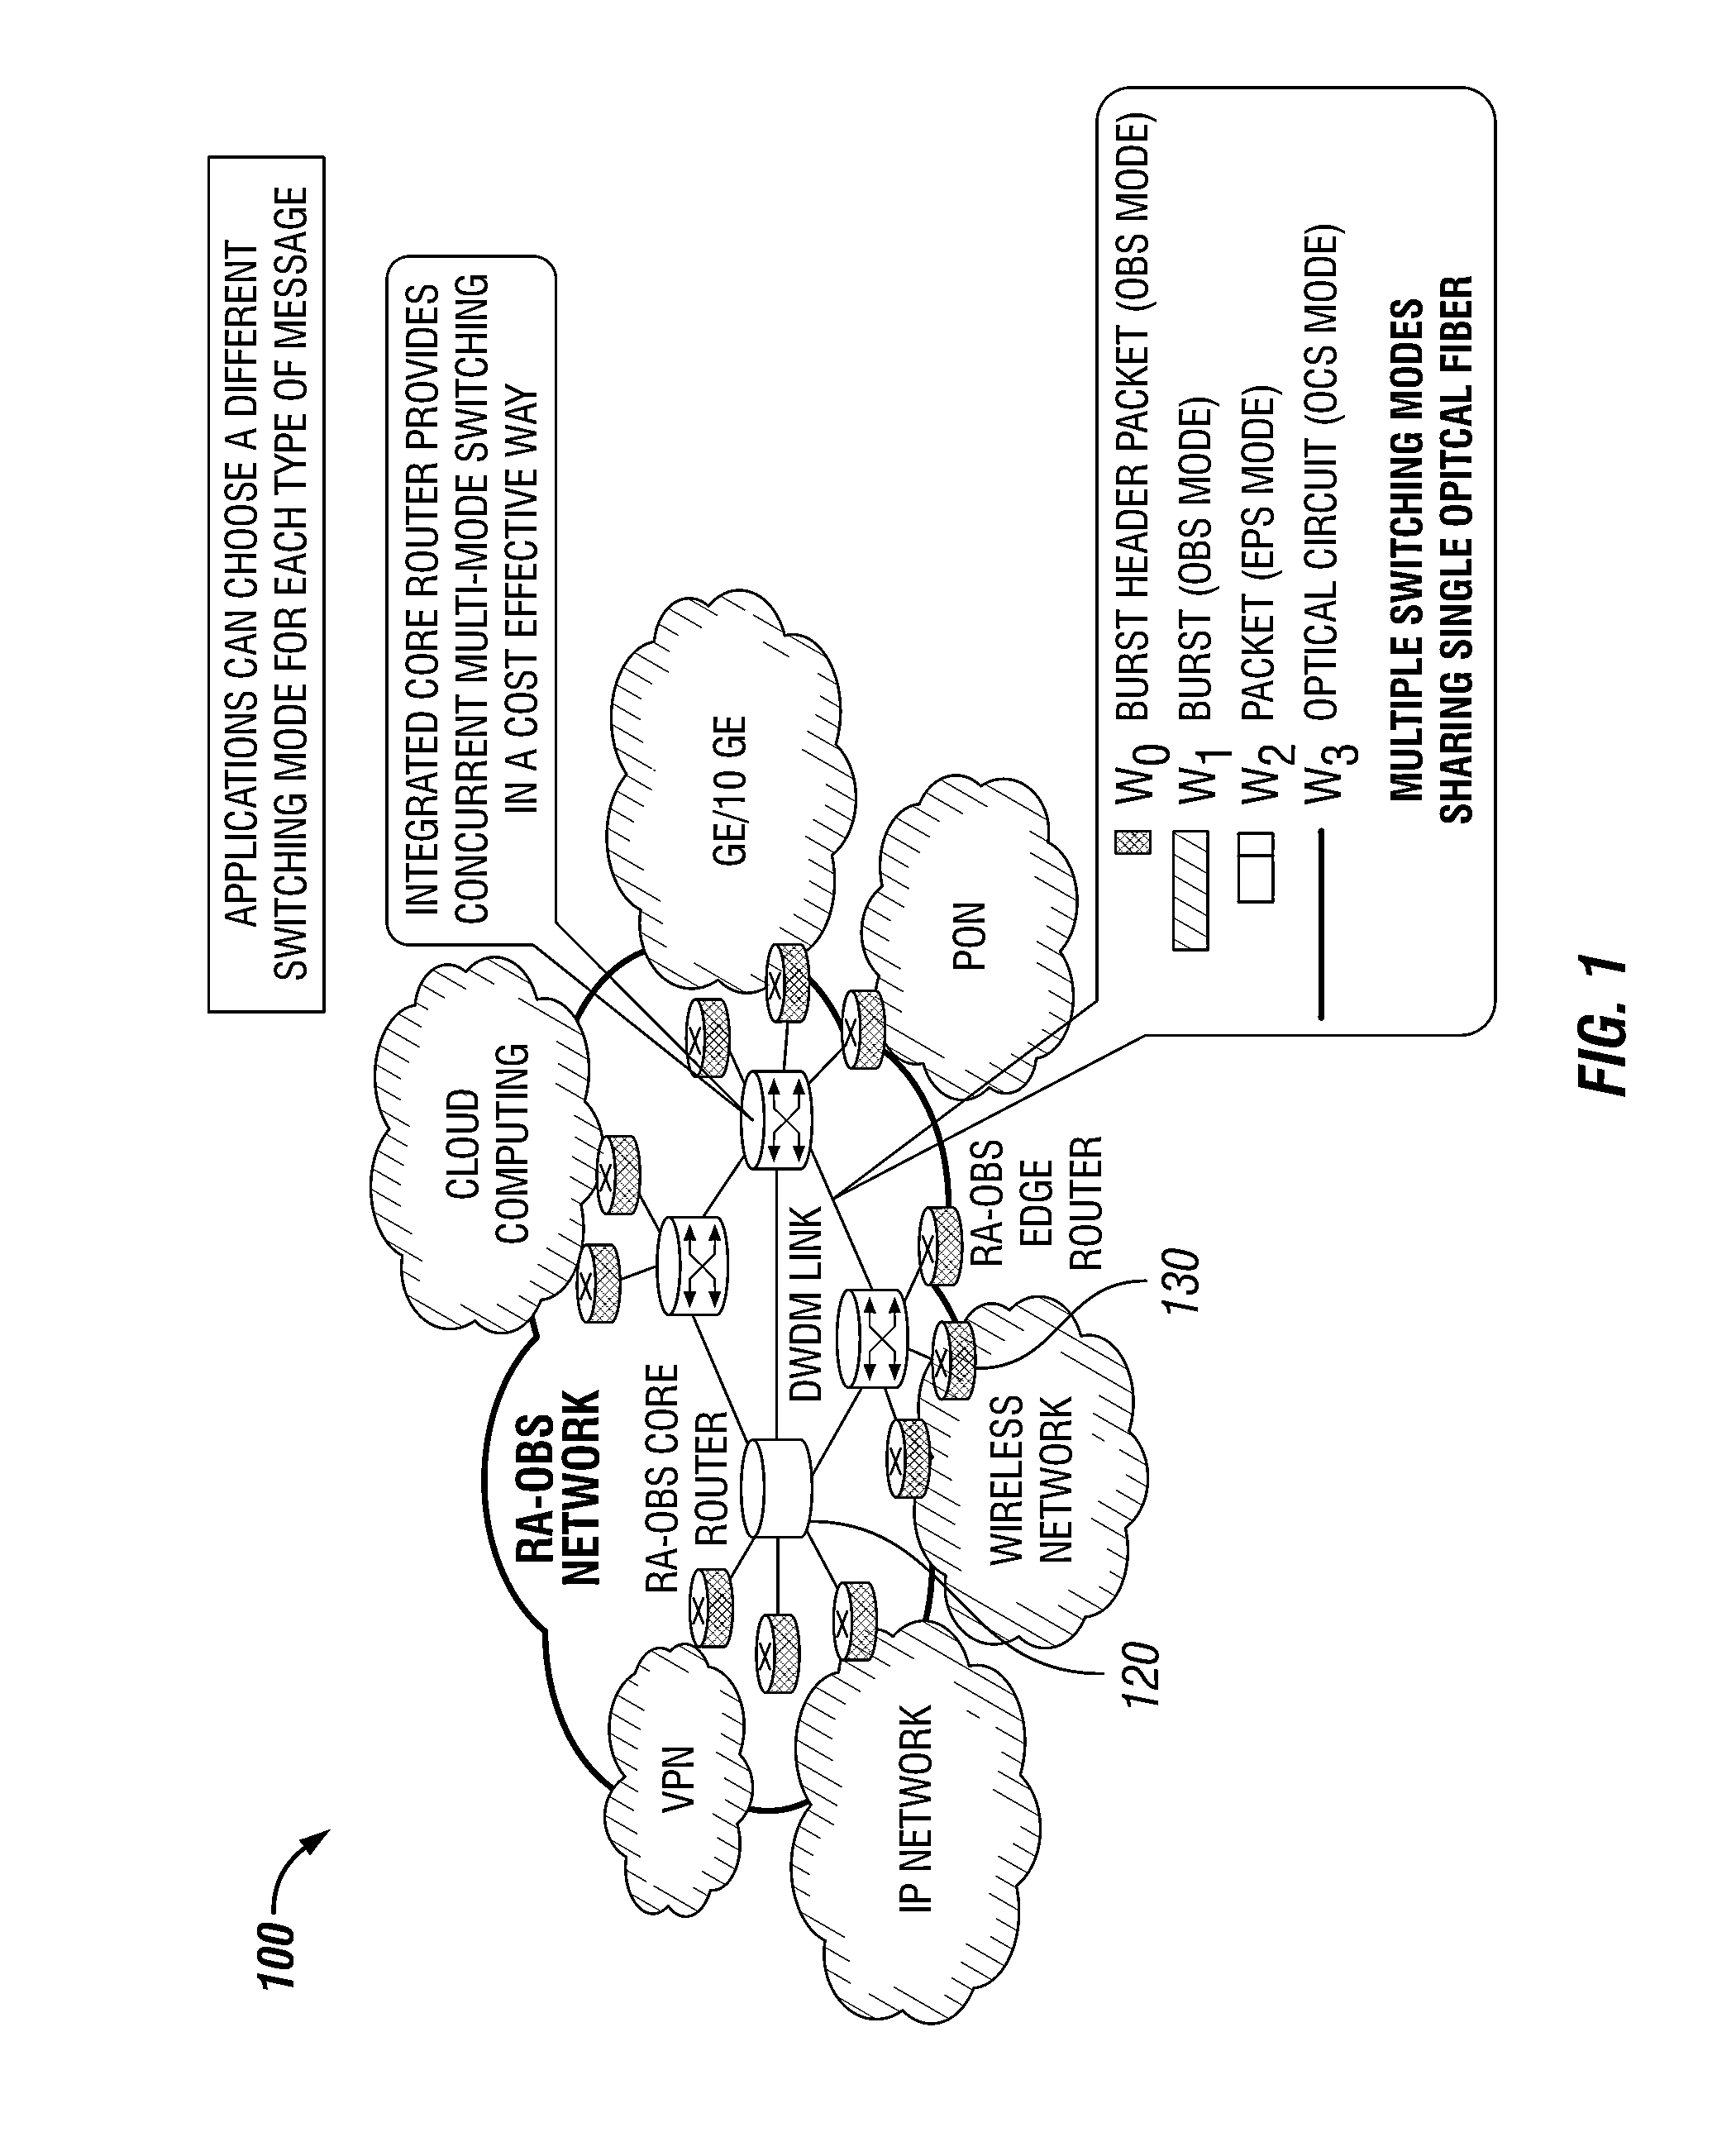 Dense wavelength division multiplexing multi-mode switching systems and methods for concurrent and dynamic reconfiguration with different switching modes